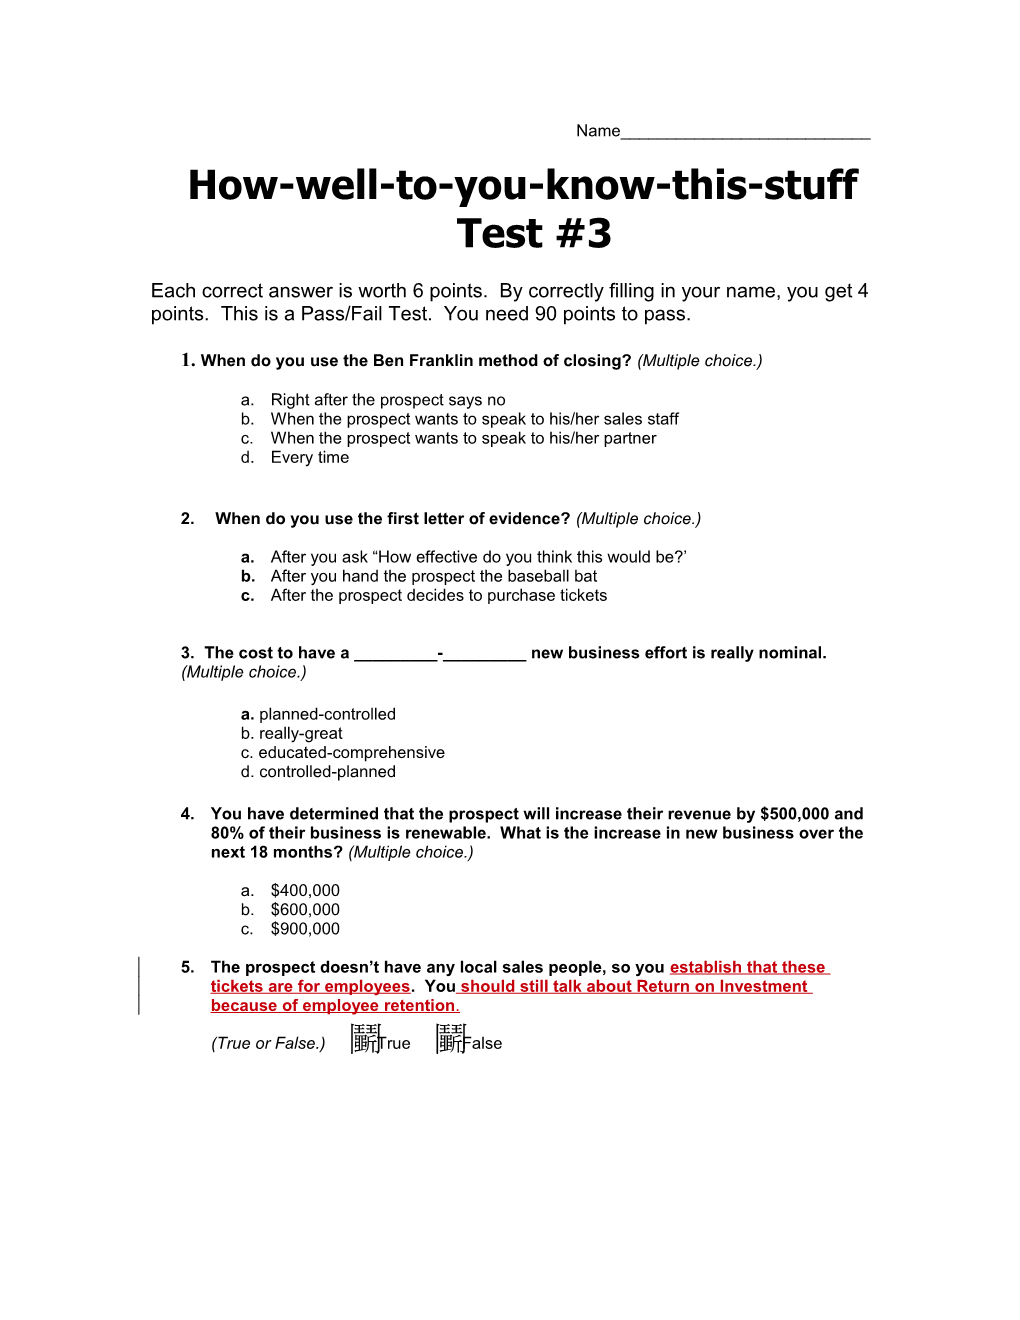 How-Well-To-You-Know-This-Stuff Test #3